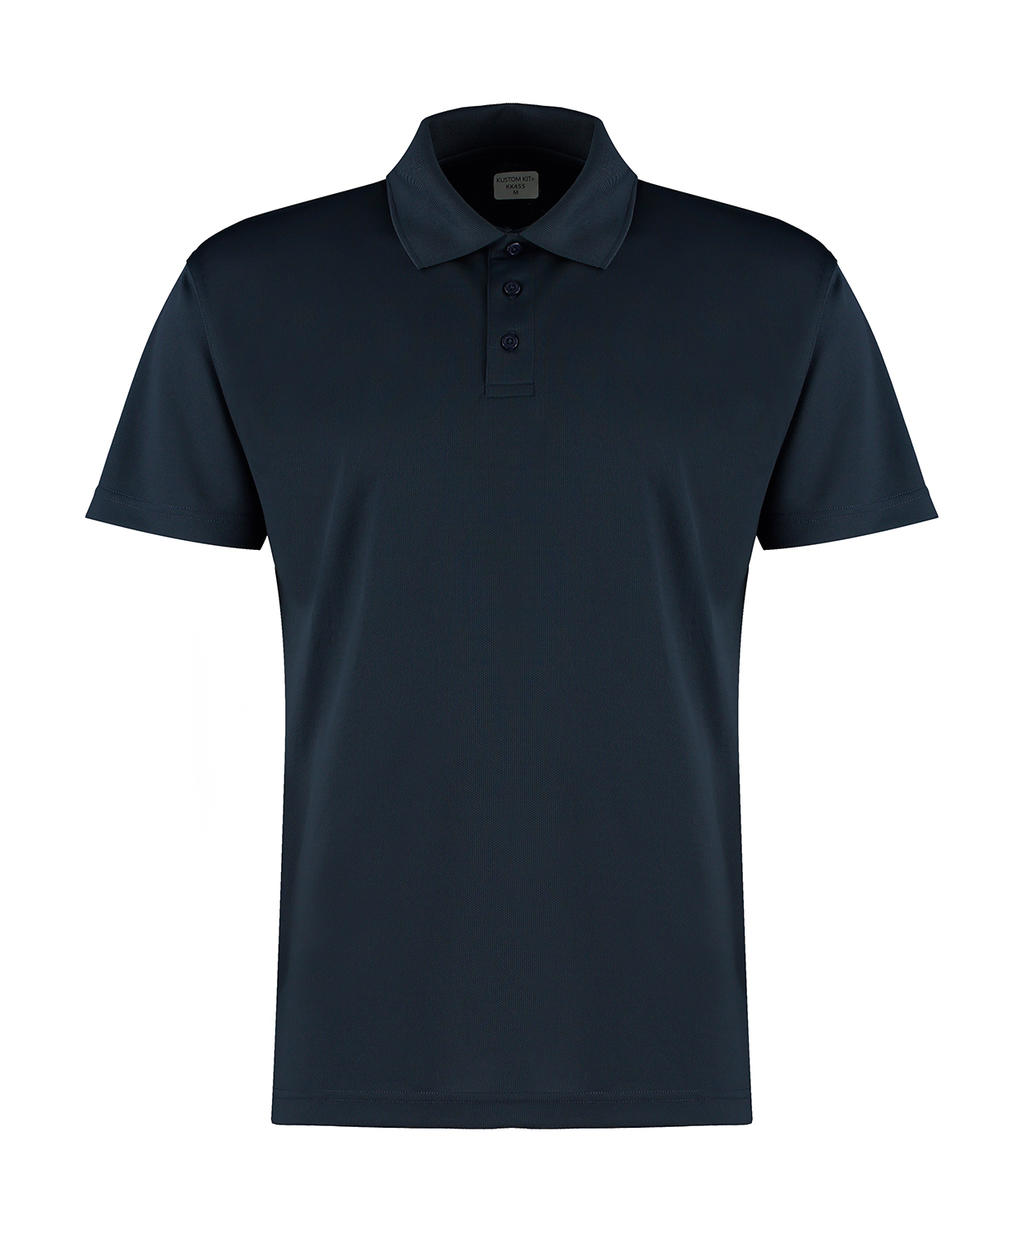  Regular Fit Cooltex? Plus Micro Mesh Polo in Farbe Navy